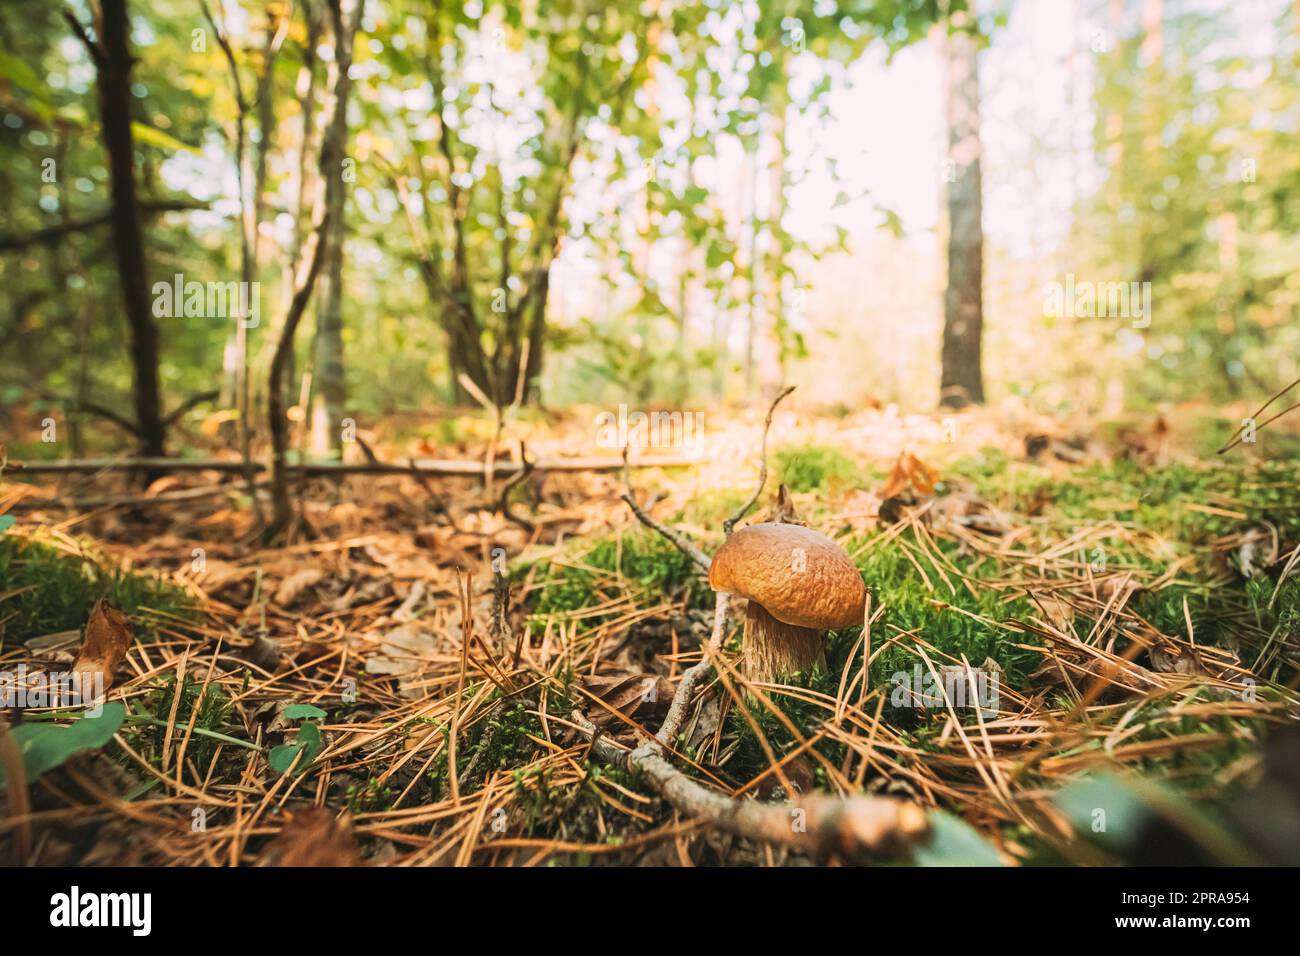 Boletus Edulis Growing Among Moss And Pine Needles In Autumn Forest Stock Photo